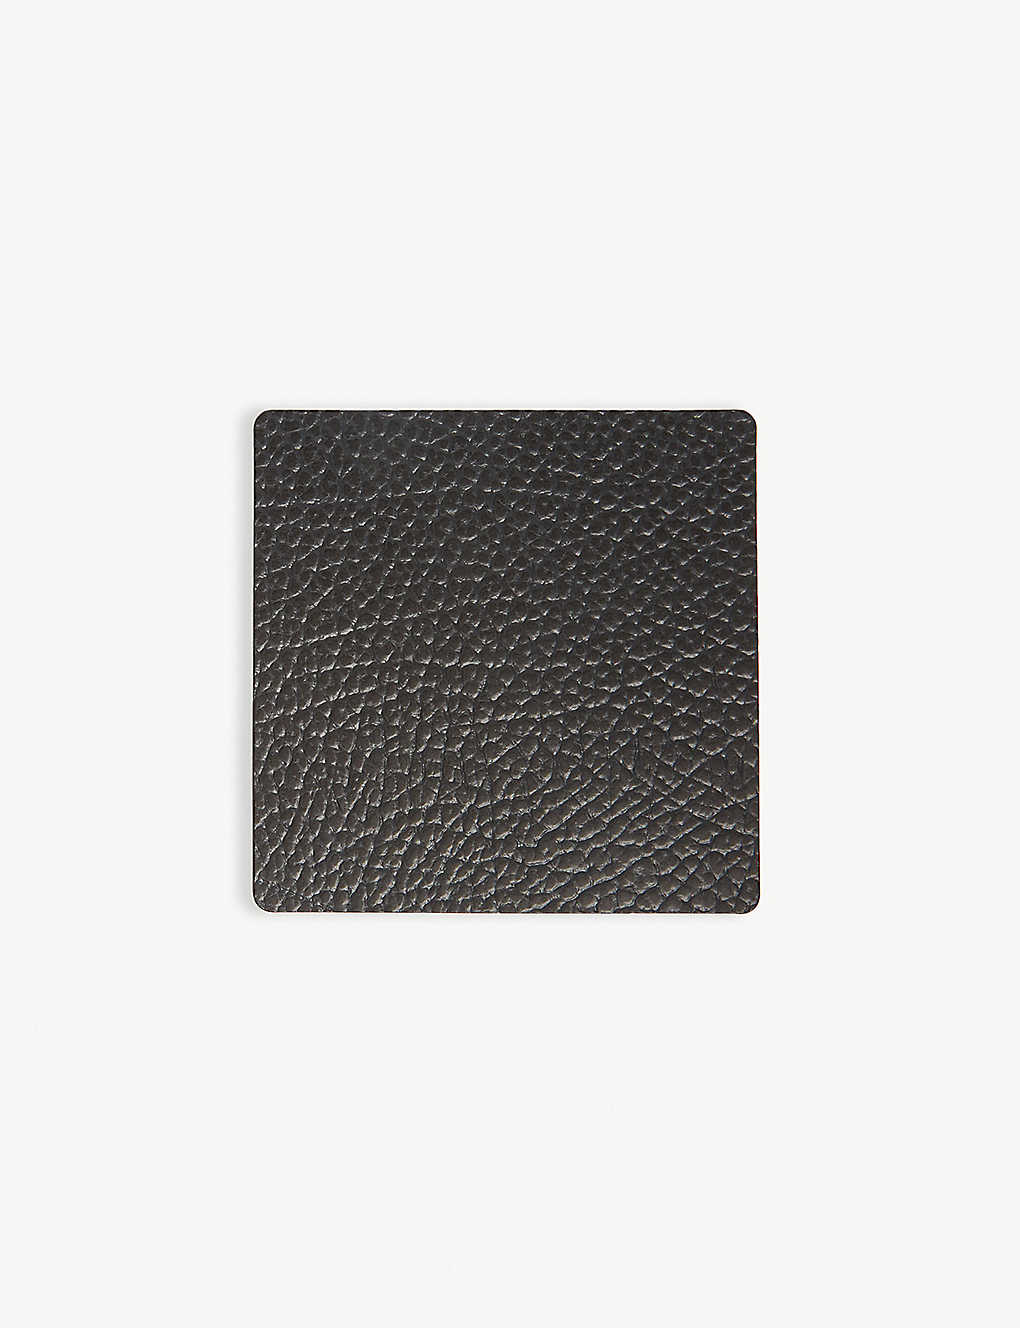 Lind Dna Hippo Square Leather Coaster In Black Anthracite